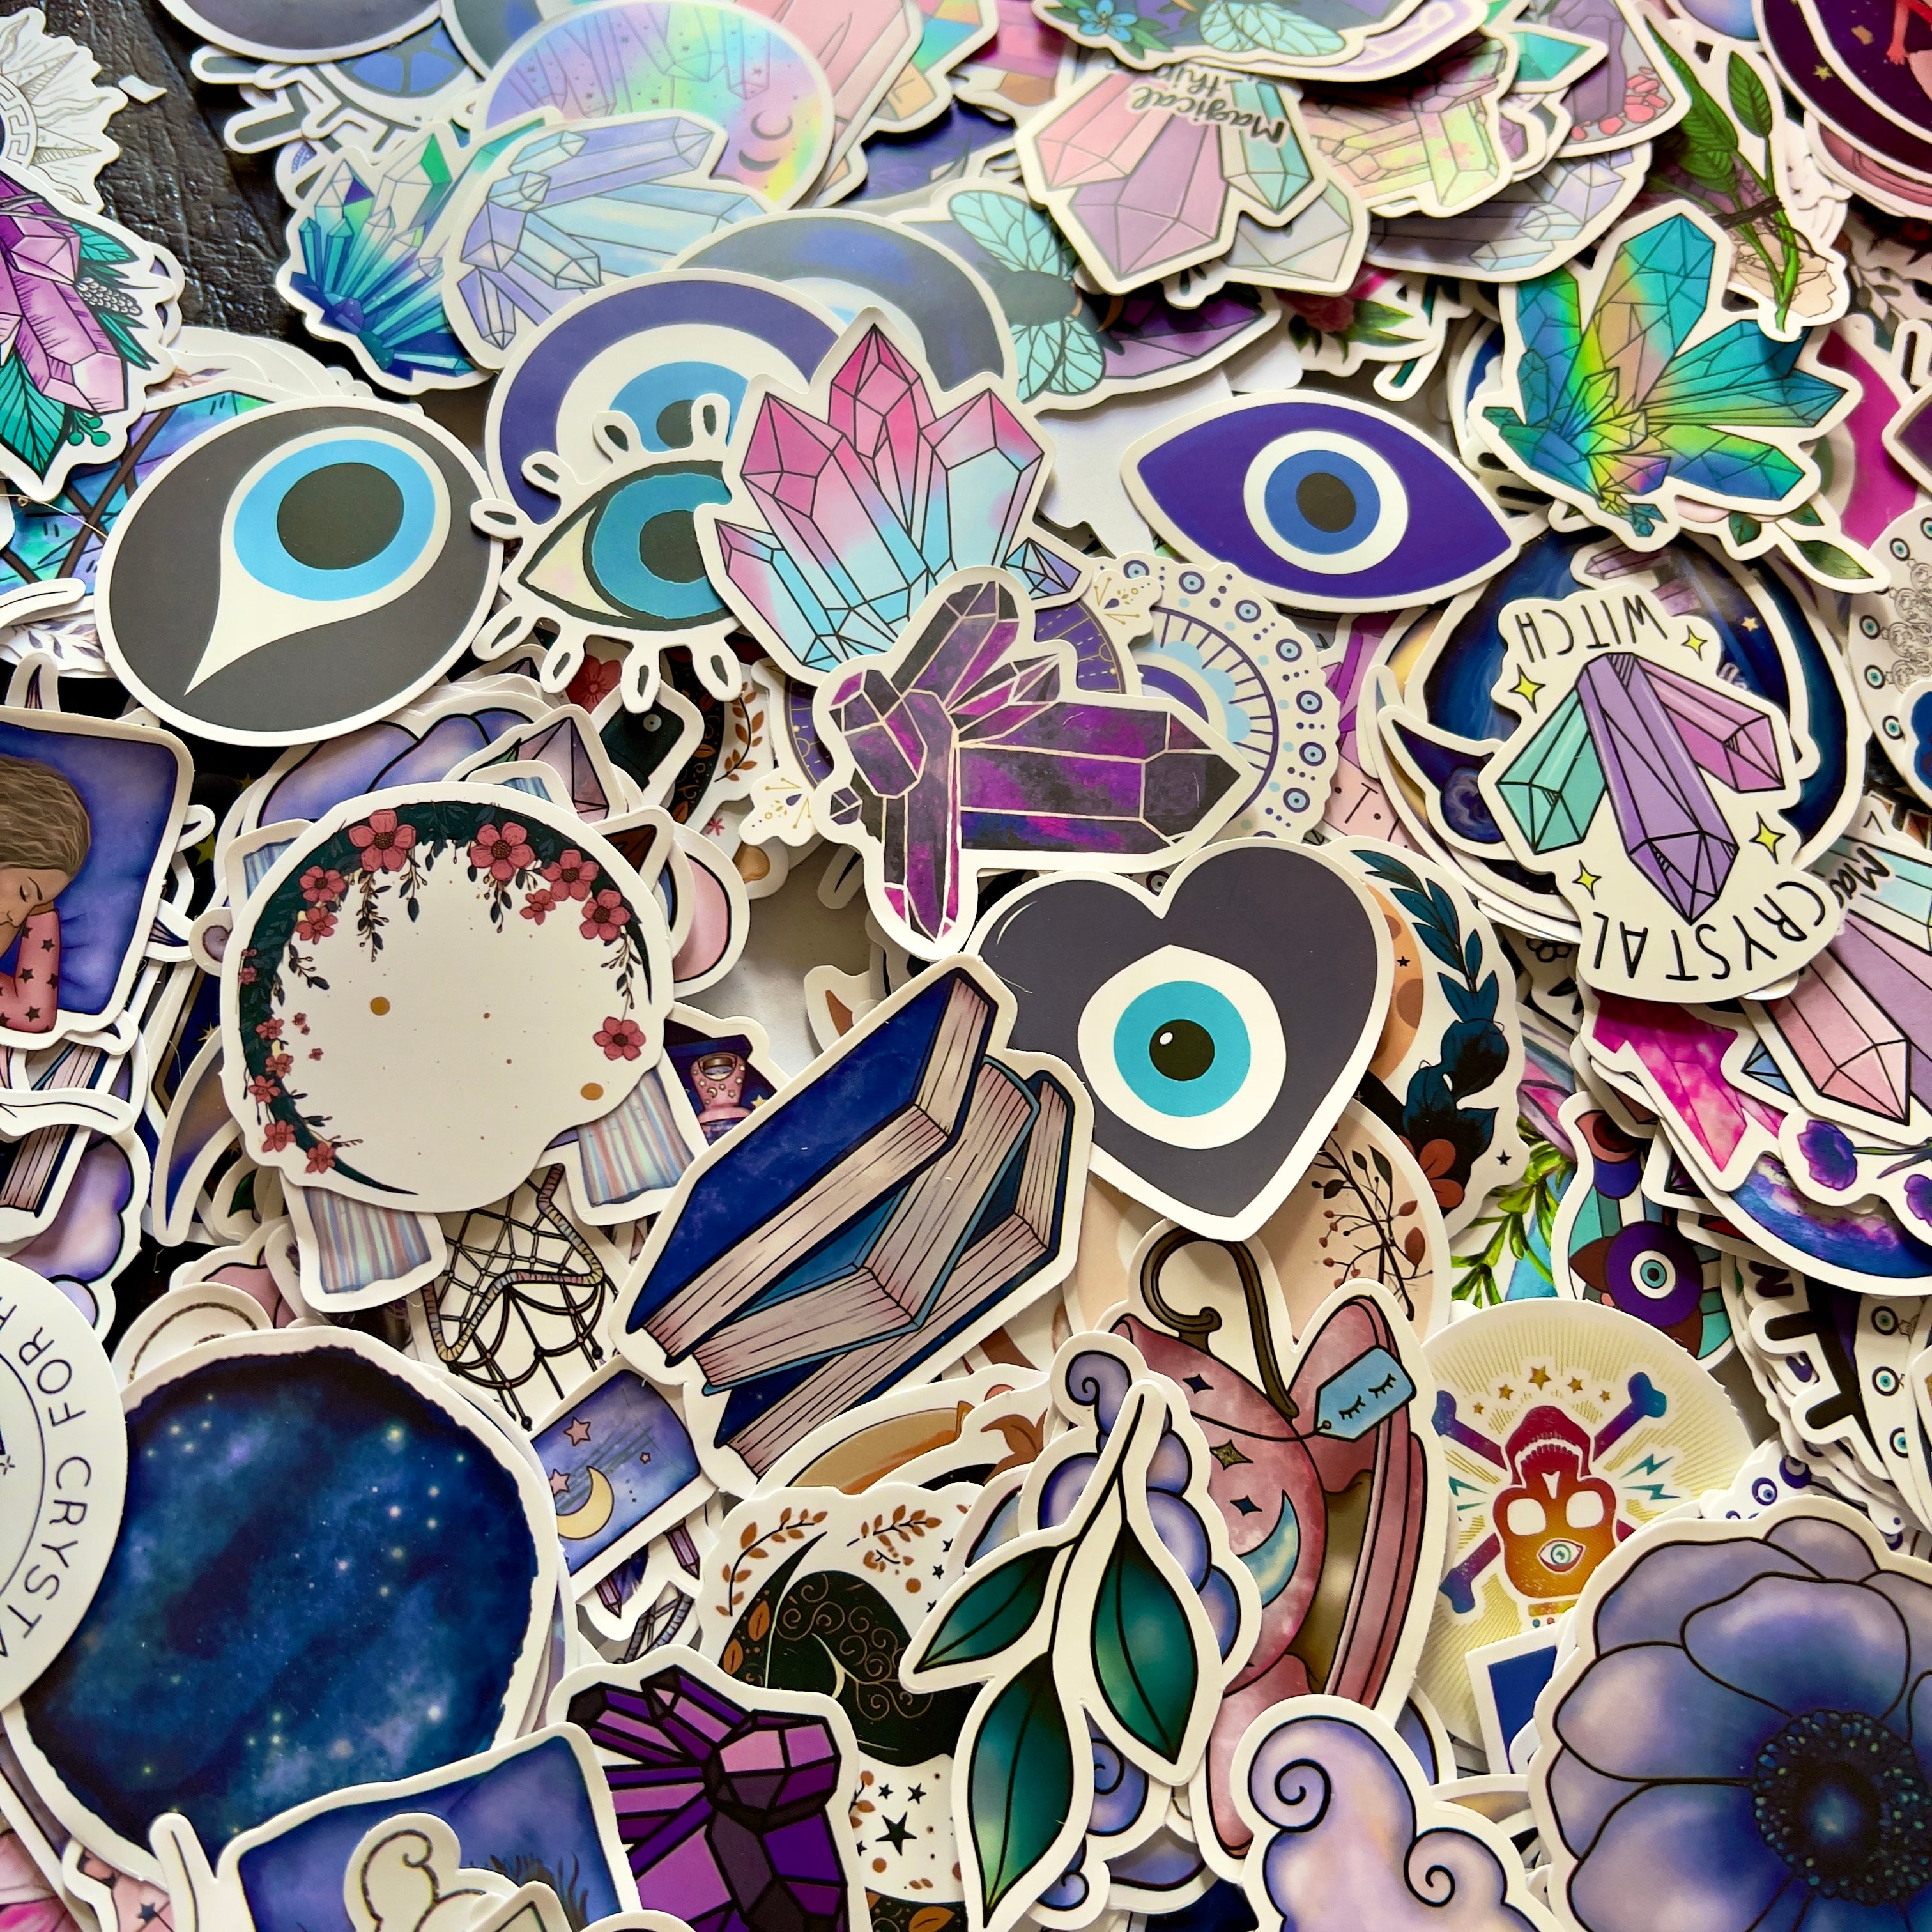 Witchy Stickers, Spiritual Confetti Stickers, Crystals, Black Cat, Boho Aesthetic, Mystery Evil Eye Moon Stars, Tarot Card Stickers